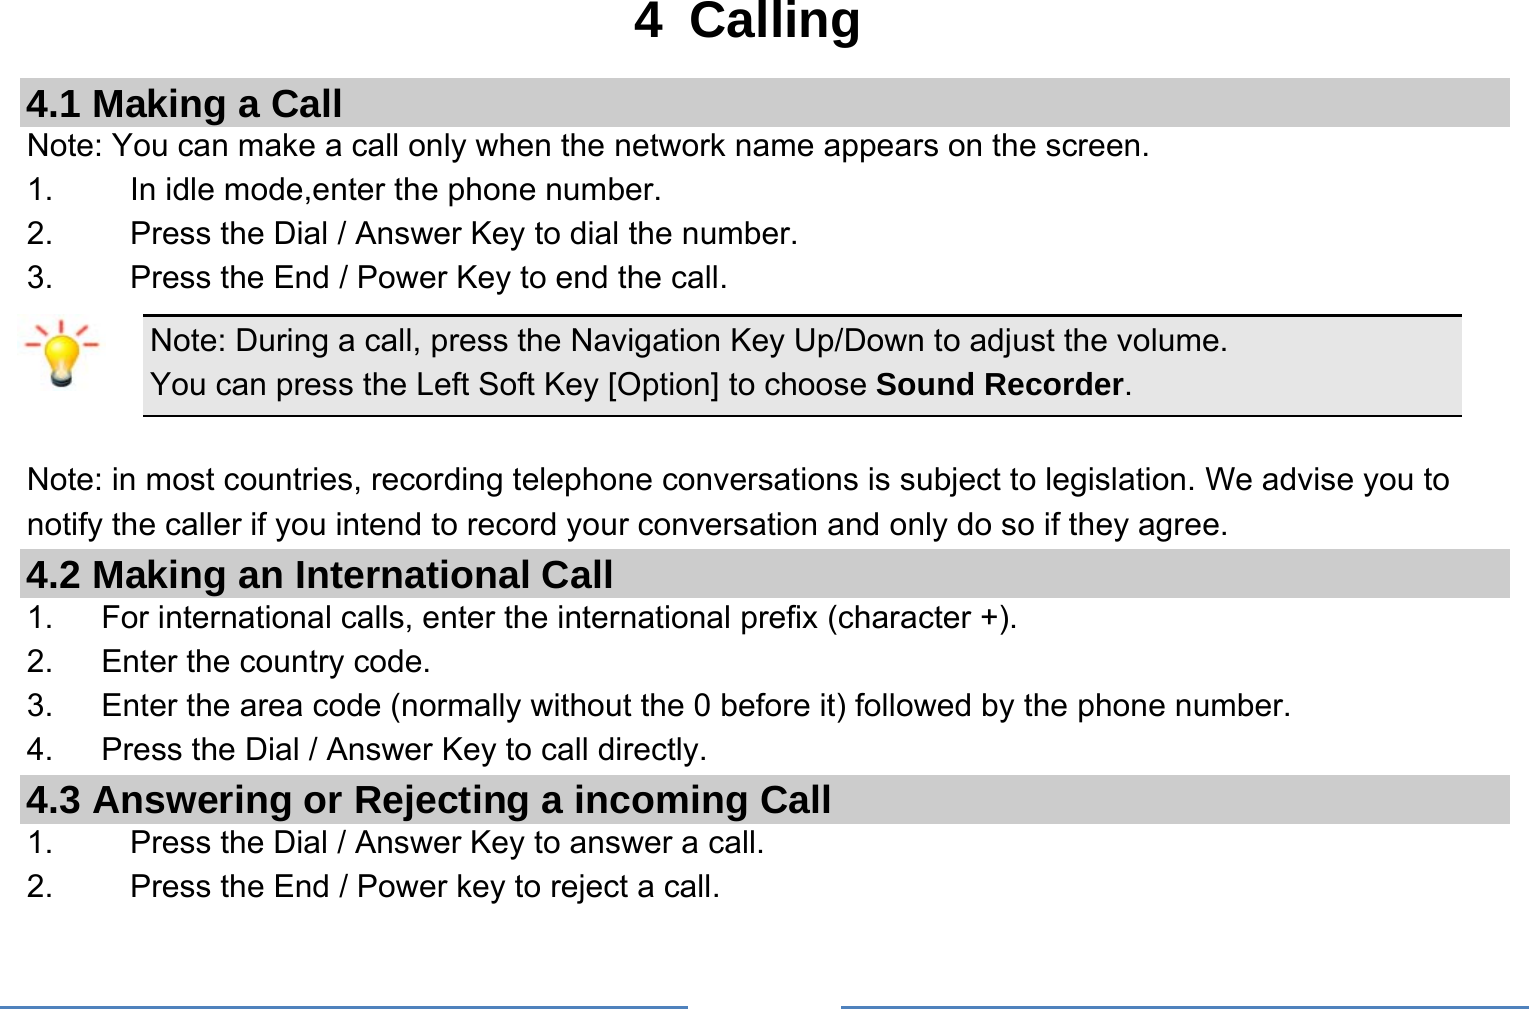     4 Calling 4.1 Making a Call Note: You can make a call only when the network name appears on the screen. 1.    In idle mode,enter the phone number. 2.  Press the Dial / Answer Key to dial the number. 3.    Press the End / Power Key to end the call. Note: During a call, press the Navigation Key Up/Down to adjust the volume. You can press the Left Soft Key [Option] to choose Sound Recorder.  Note: in most countries, recording telephone conversations is subject to legislation. We advise you to notify the caller if you intend to record your conversation and only do so if they agree. 4.2 Making an International Call 1.      For international calls, enter the international prefix (character +). 2.      Enter the country code. 3.   Enter the area code (normally without the 0 before it) followed by the phone number. 4.   Press the Dial / Answer Key to call directly. 4.3 Answering or Rejecting a incoming Call 1.  Press the Dial / Answer Key to answer a call. 2.  Press the End / Power key to reject a call. 